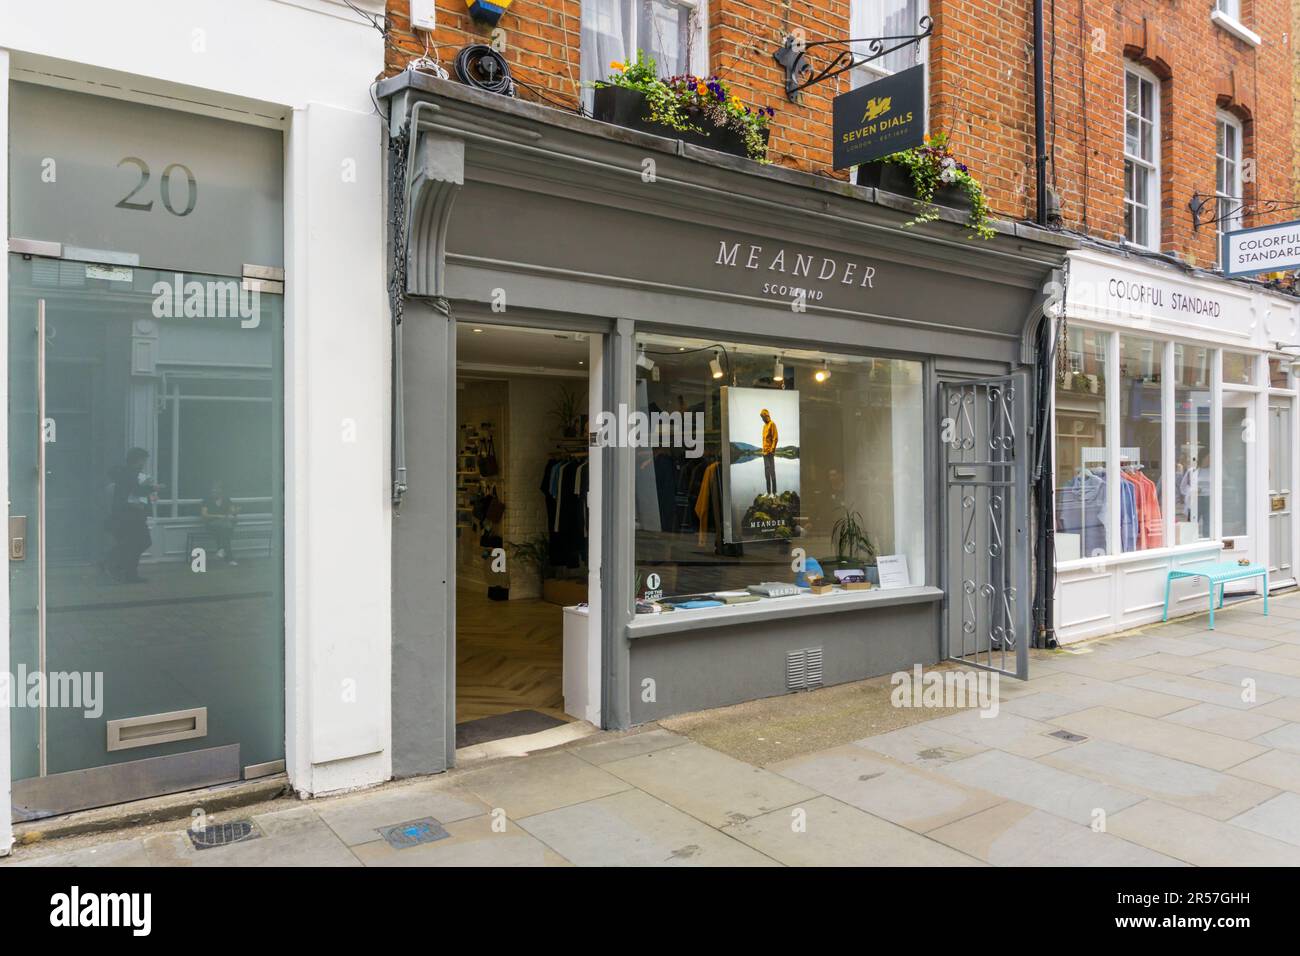 Meander clothing shop in Earlham Street, London. Stock Photo